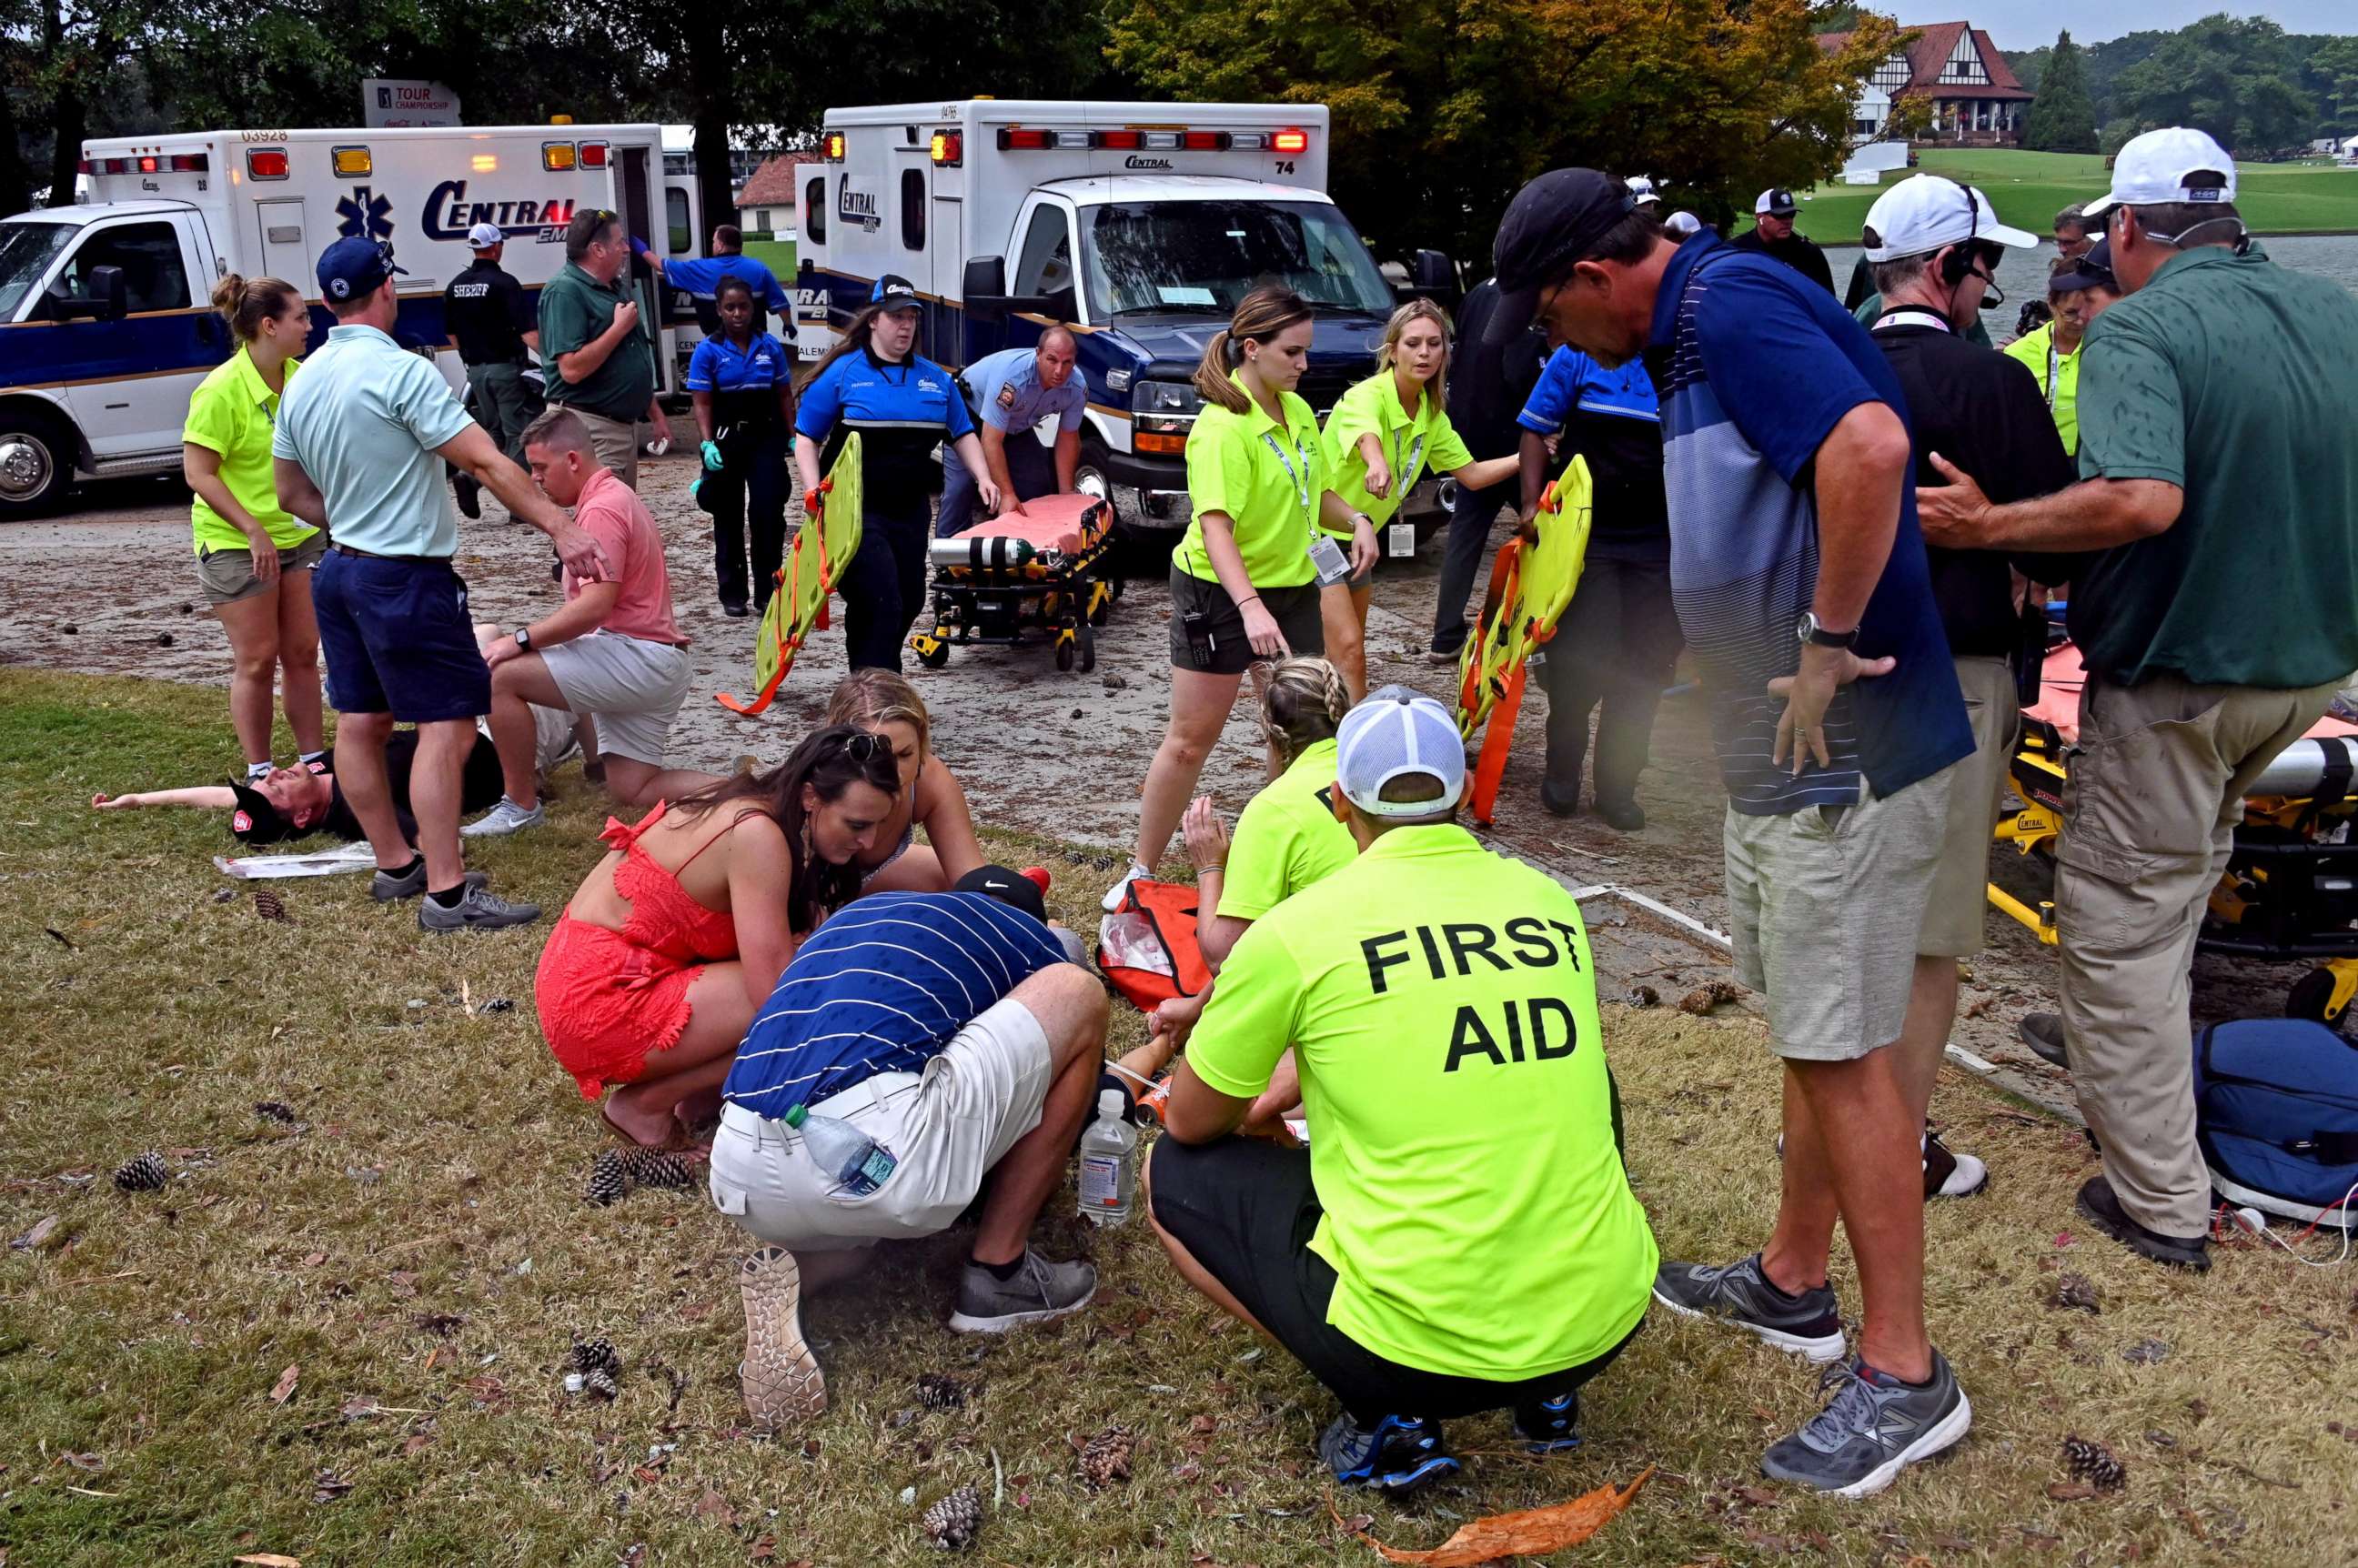 PHOTO: Fans are assisted by medical personnel after a lightning strike during the third round of the Tour Championship golf tournament at East Lake Golf Club.